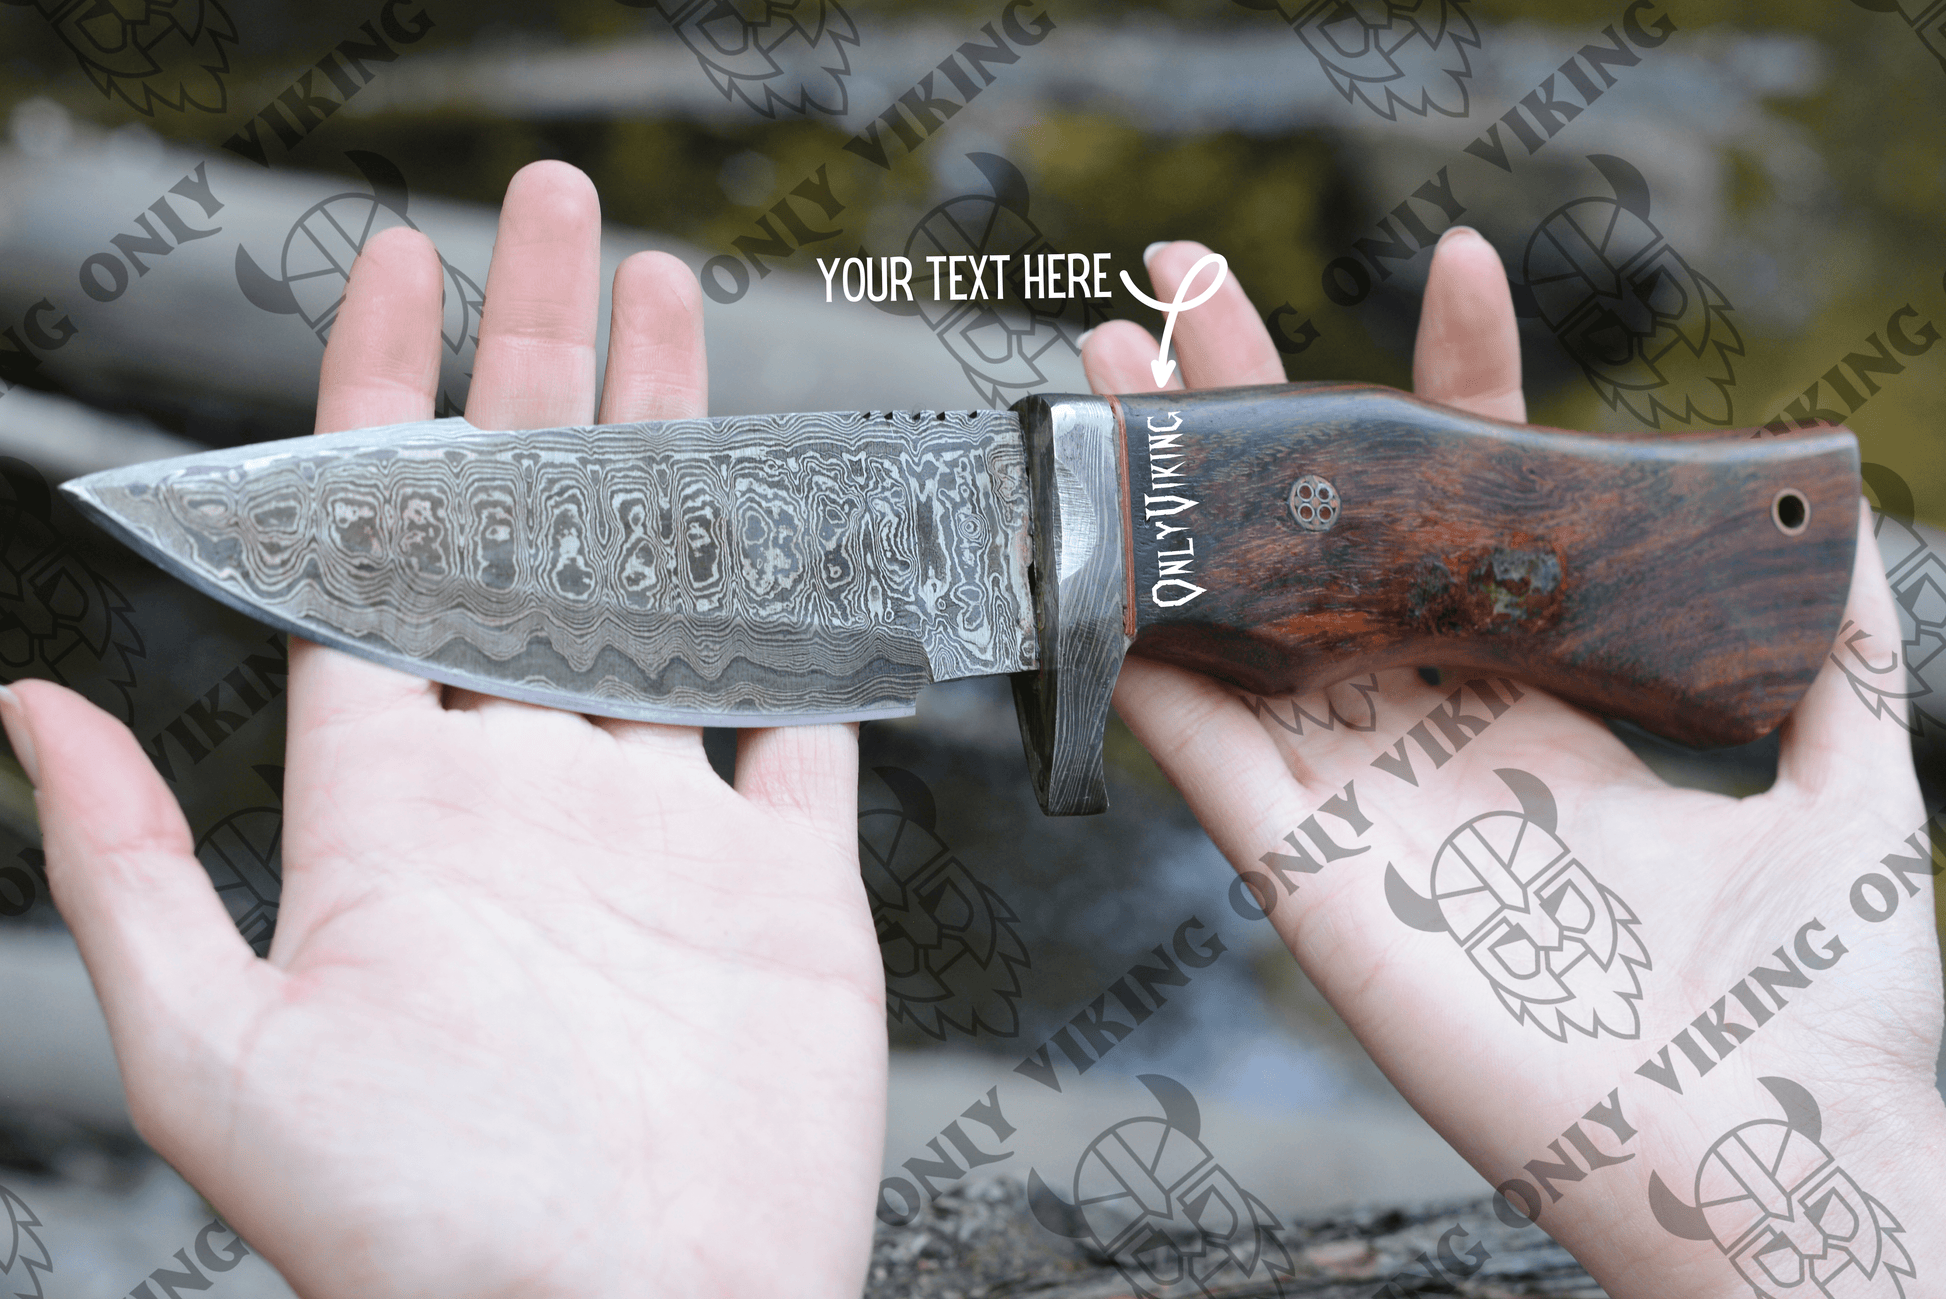 Damascus Knife - Quality Hunting and Camping, OnlyViking